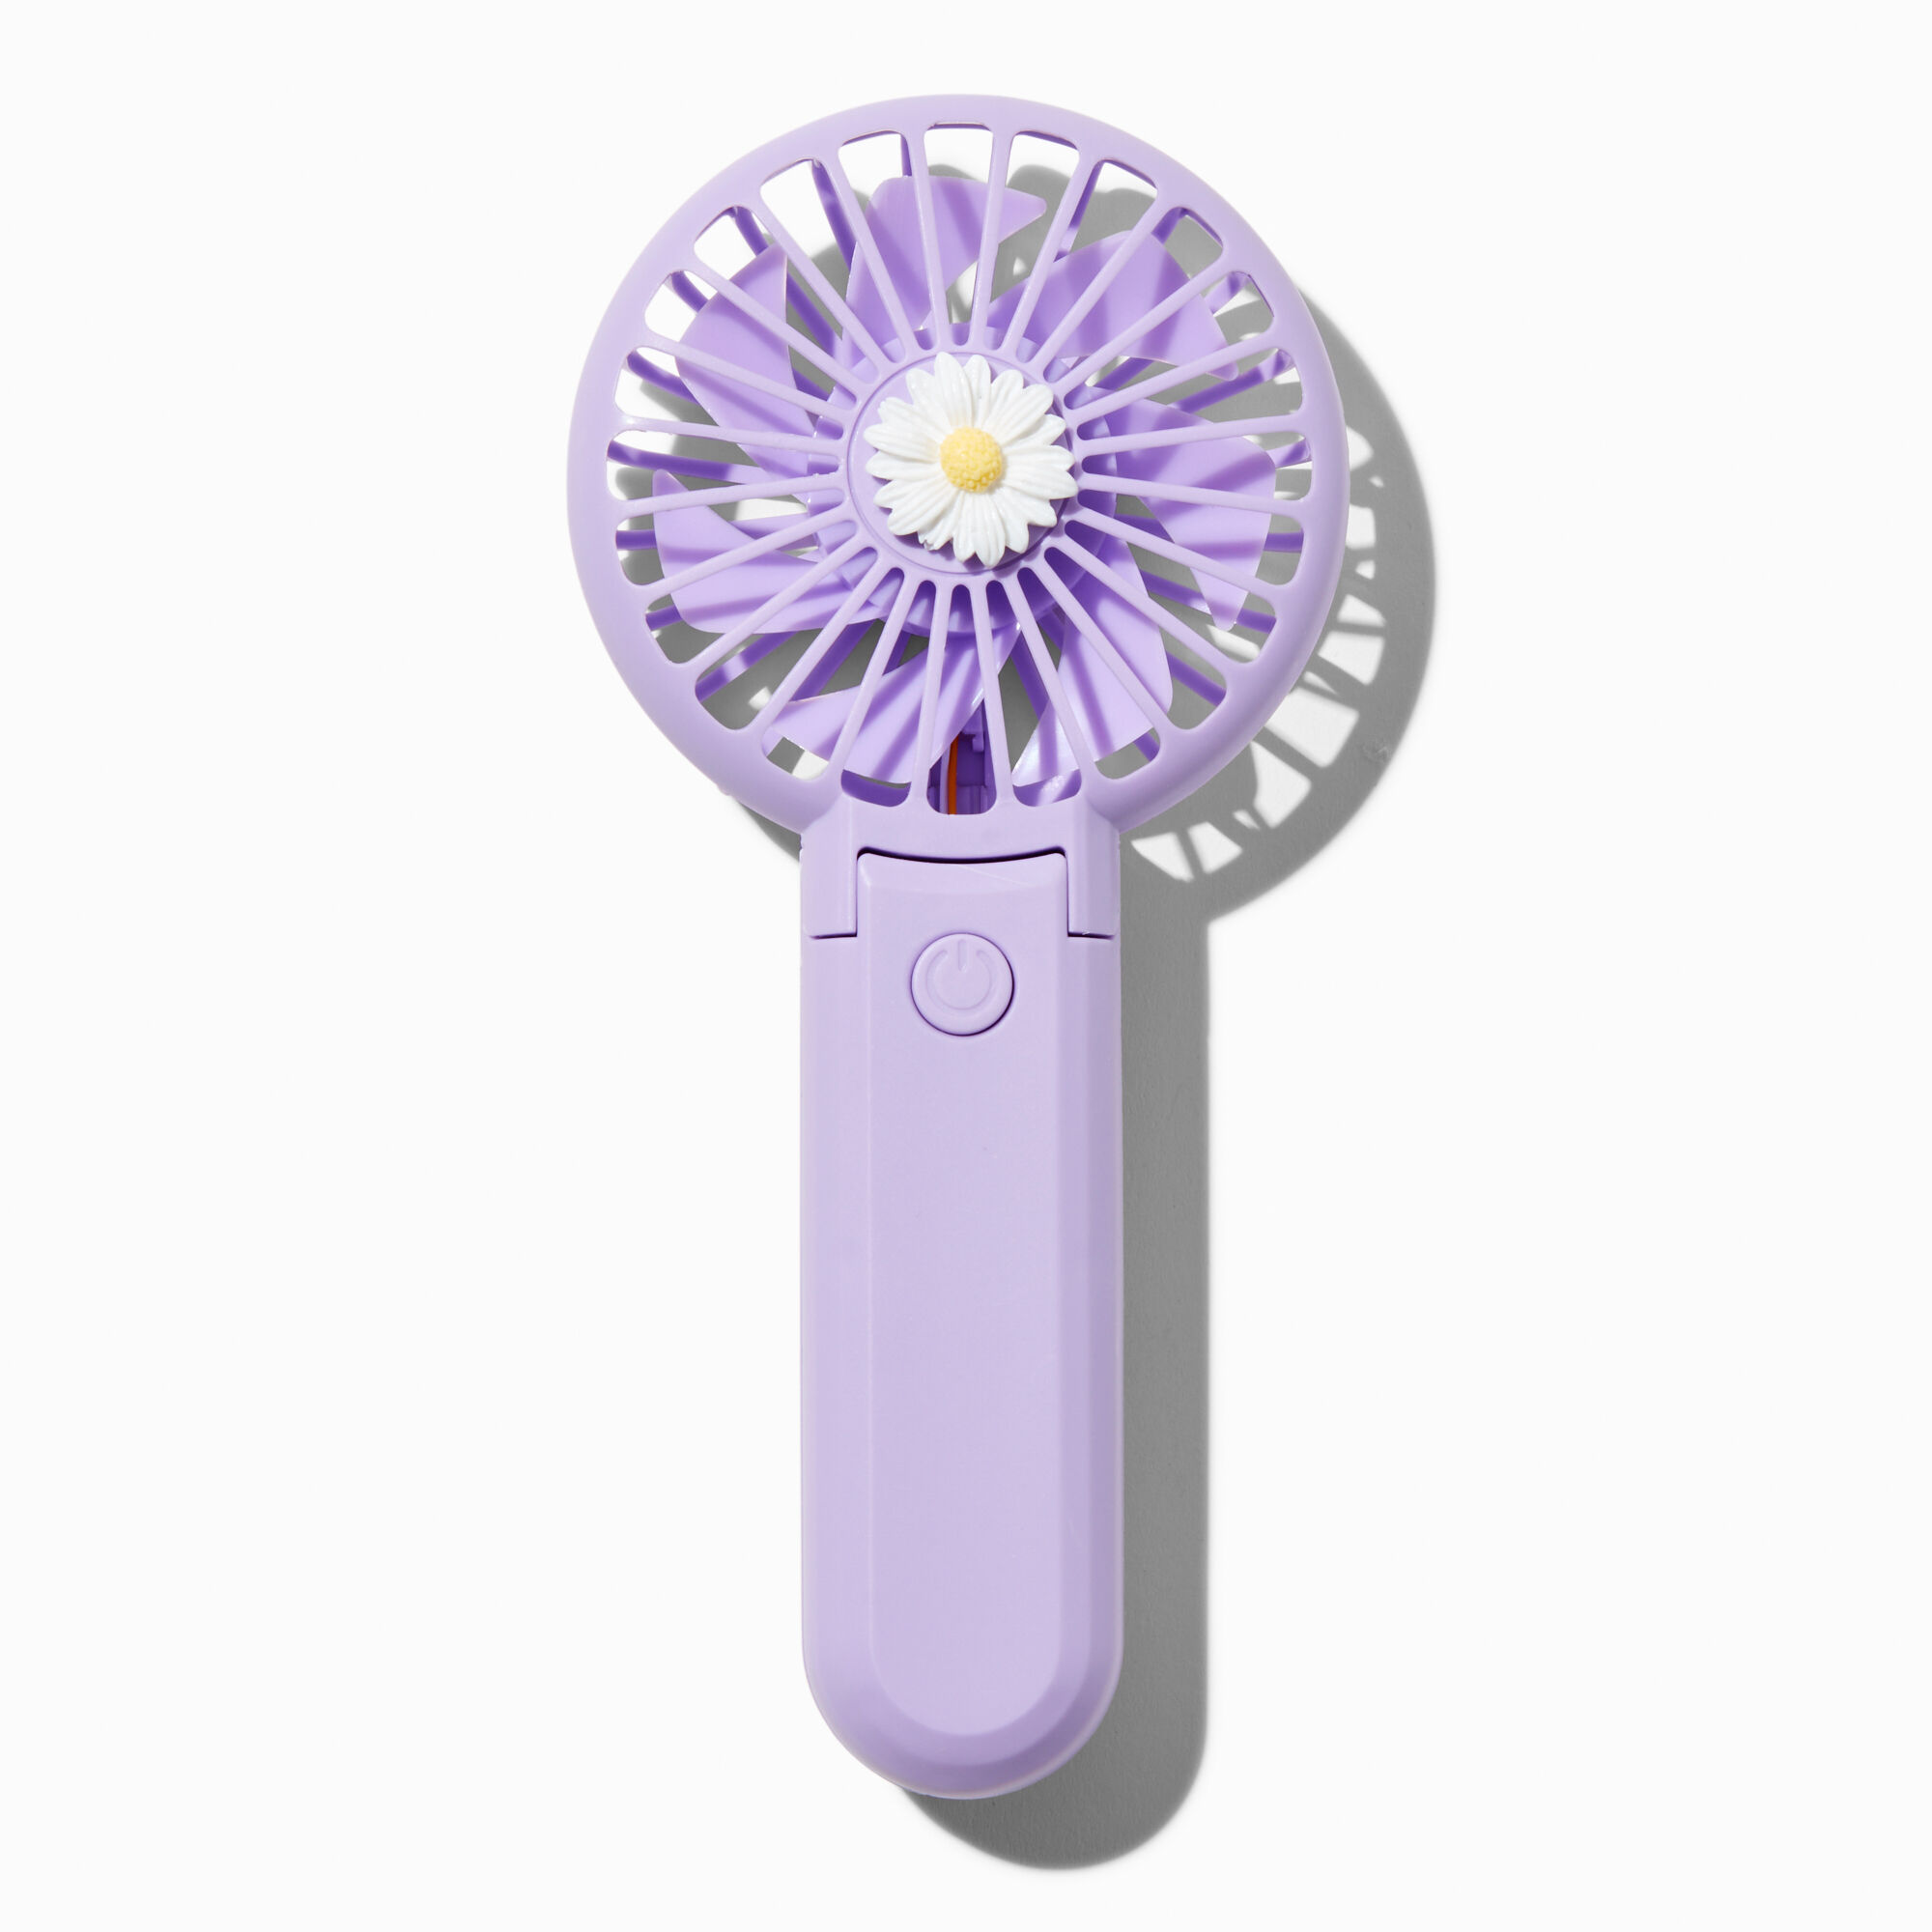 View Claires HandHeld Personal Fan Daisy information